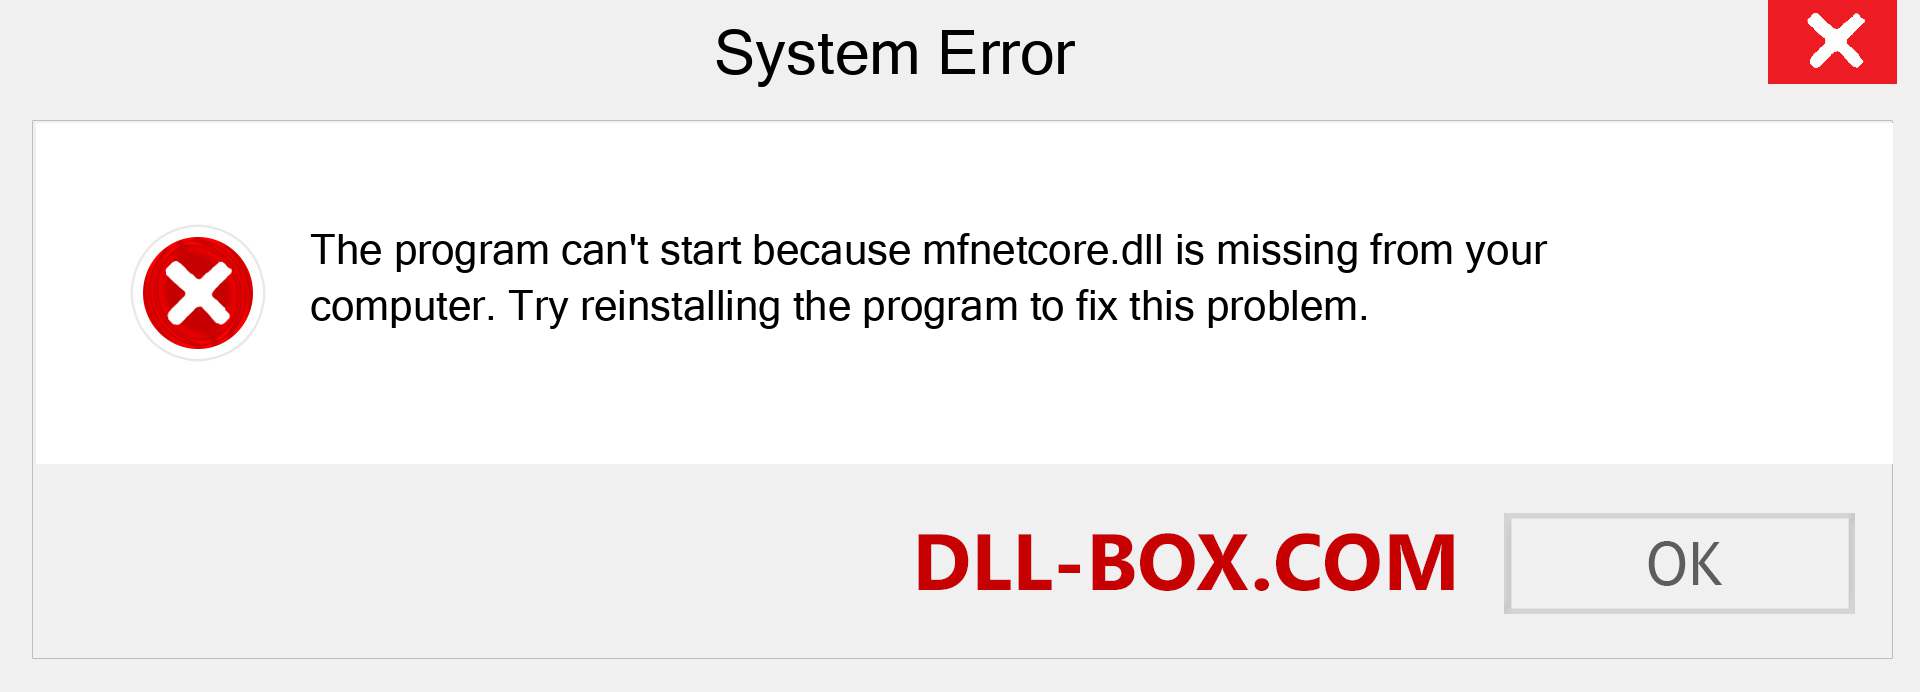  mfnetcore.dll file is missing?. Download for Windows 7, 8, 10 - Fix  mfnetcore dll Missing Error on Windows, photos, images